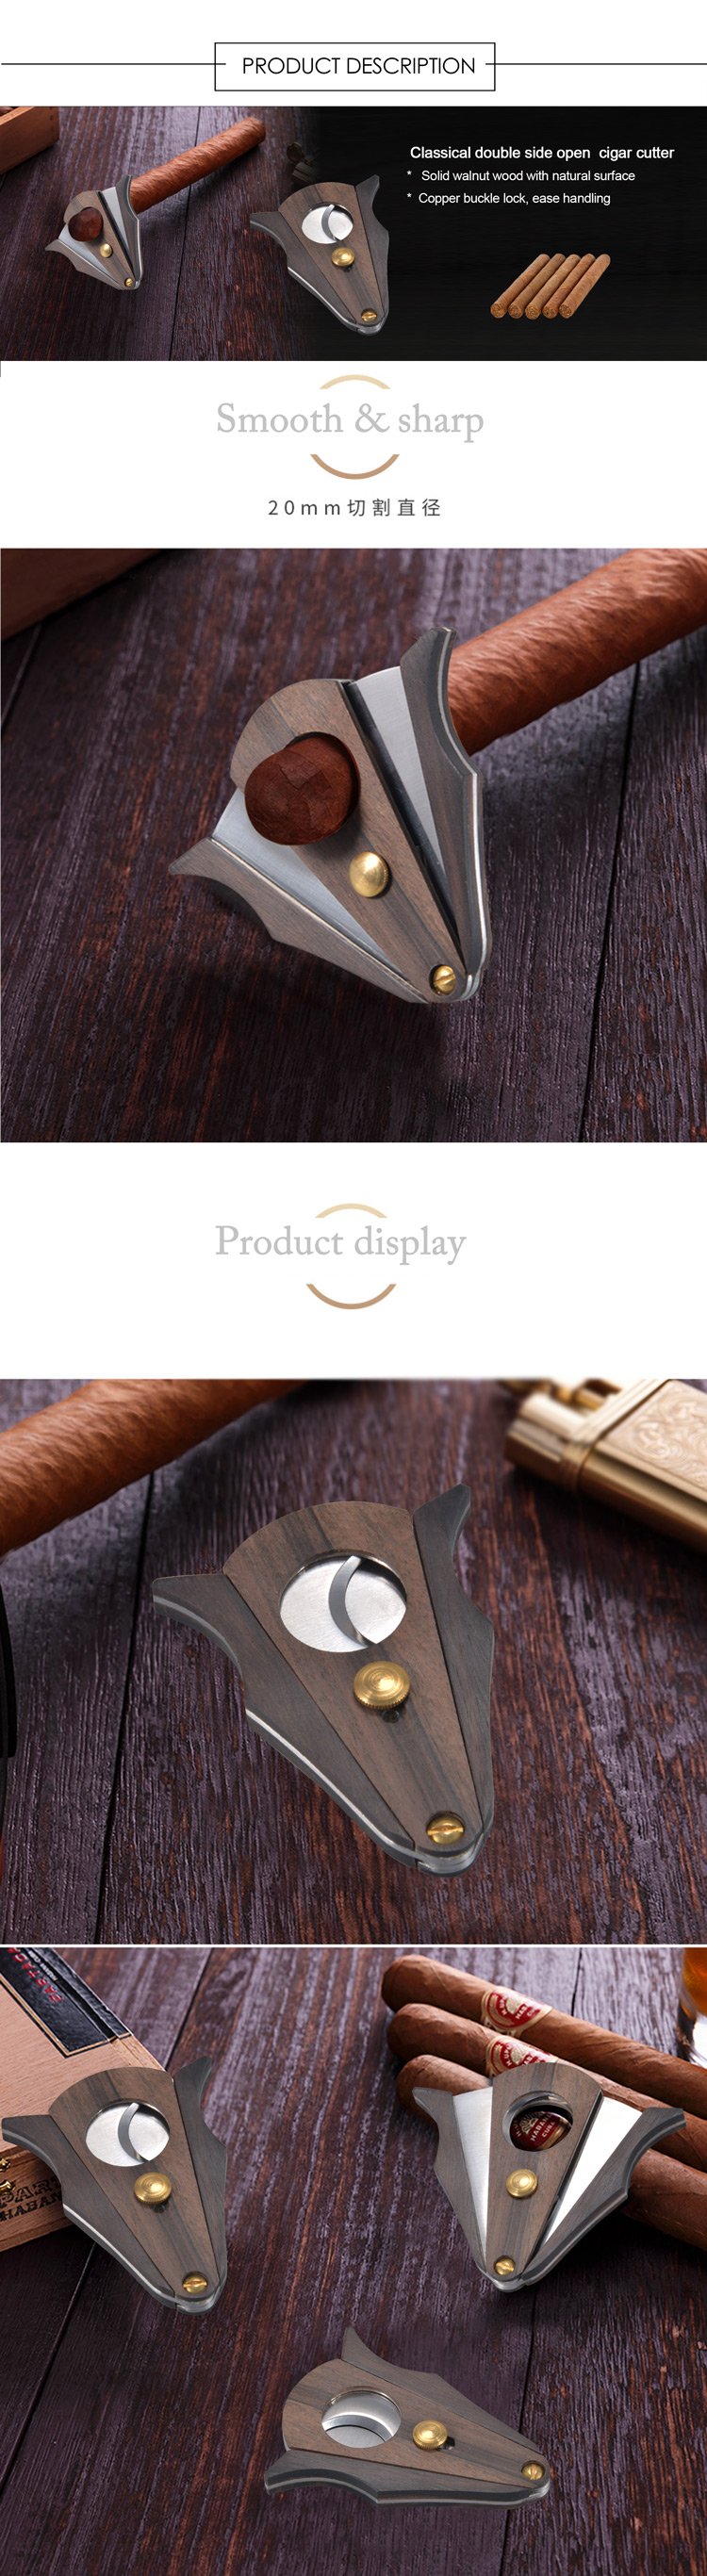 Newest Design Antique Cigars Scissors Wood Stainless Steel Cigar Cutter Amazon UK